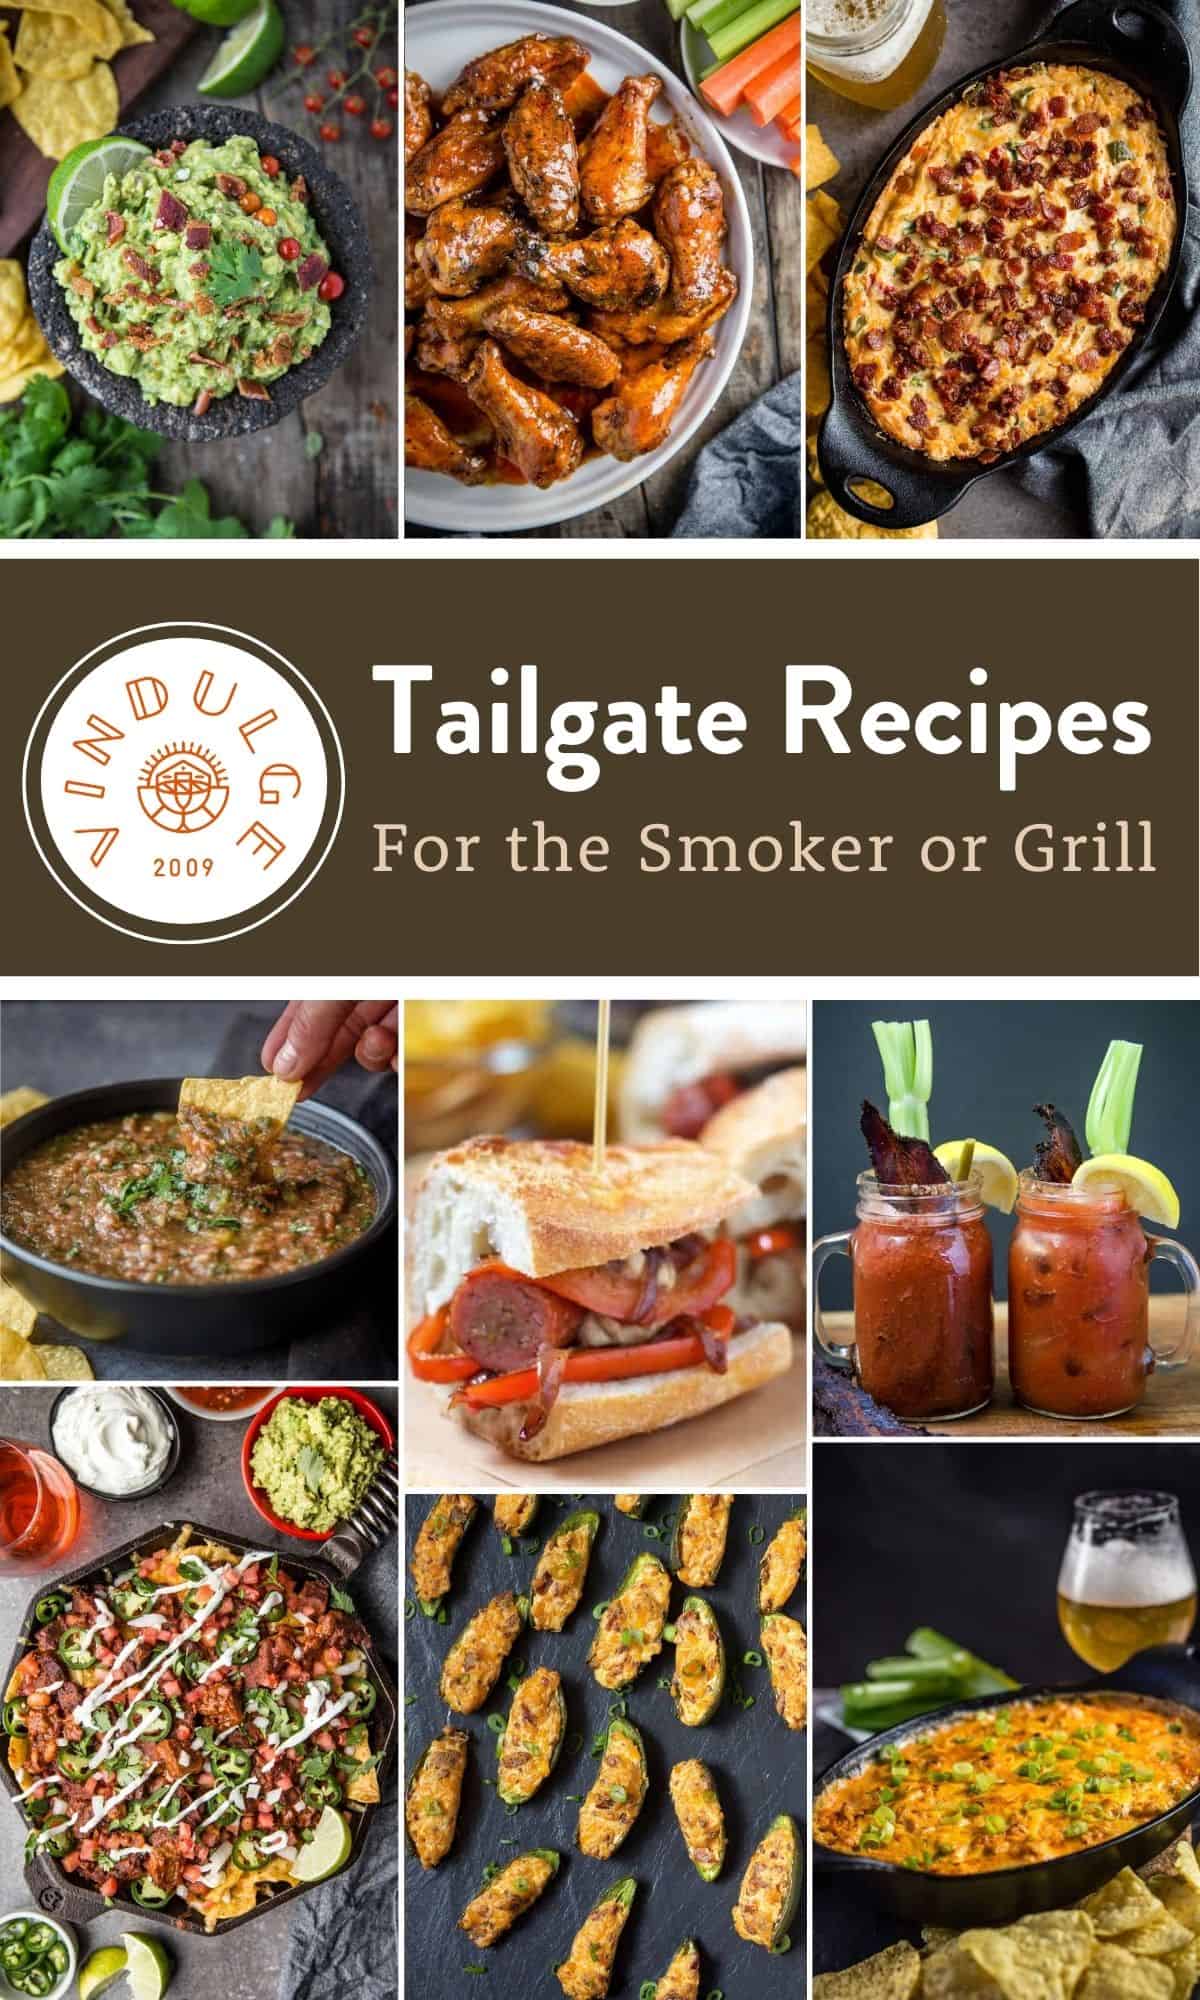 Tailgating: Grilling, Drinking, and Inventing